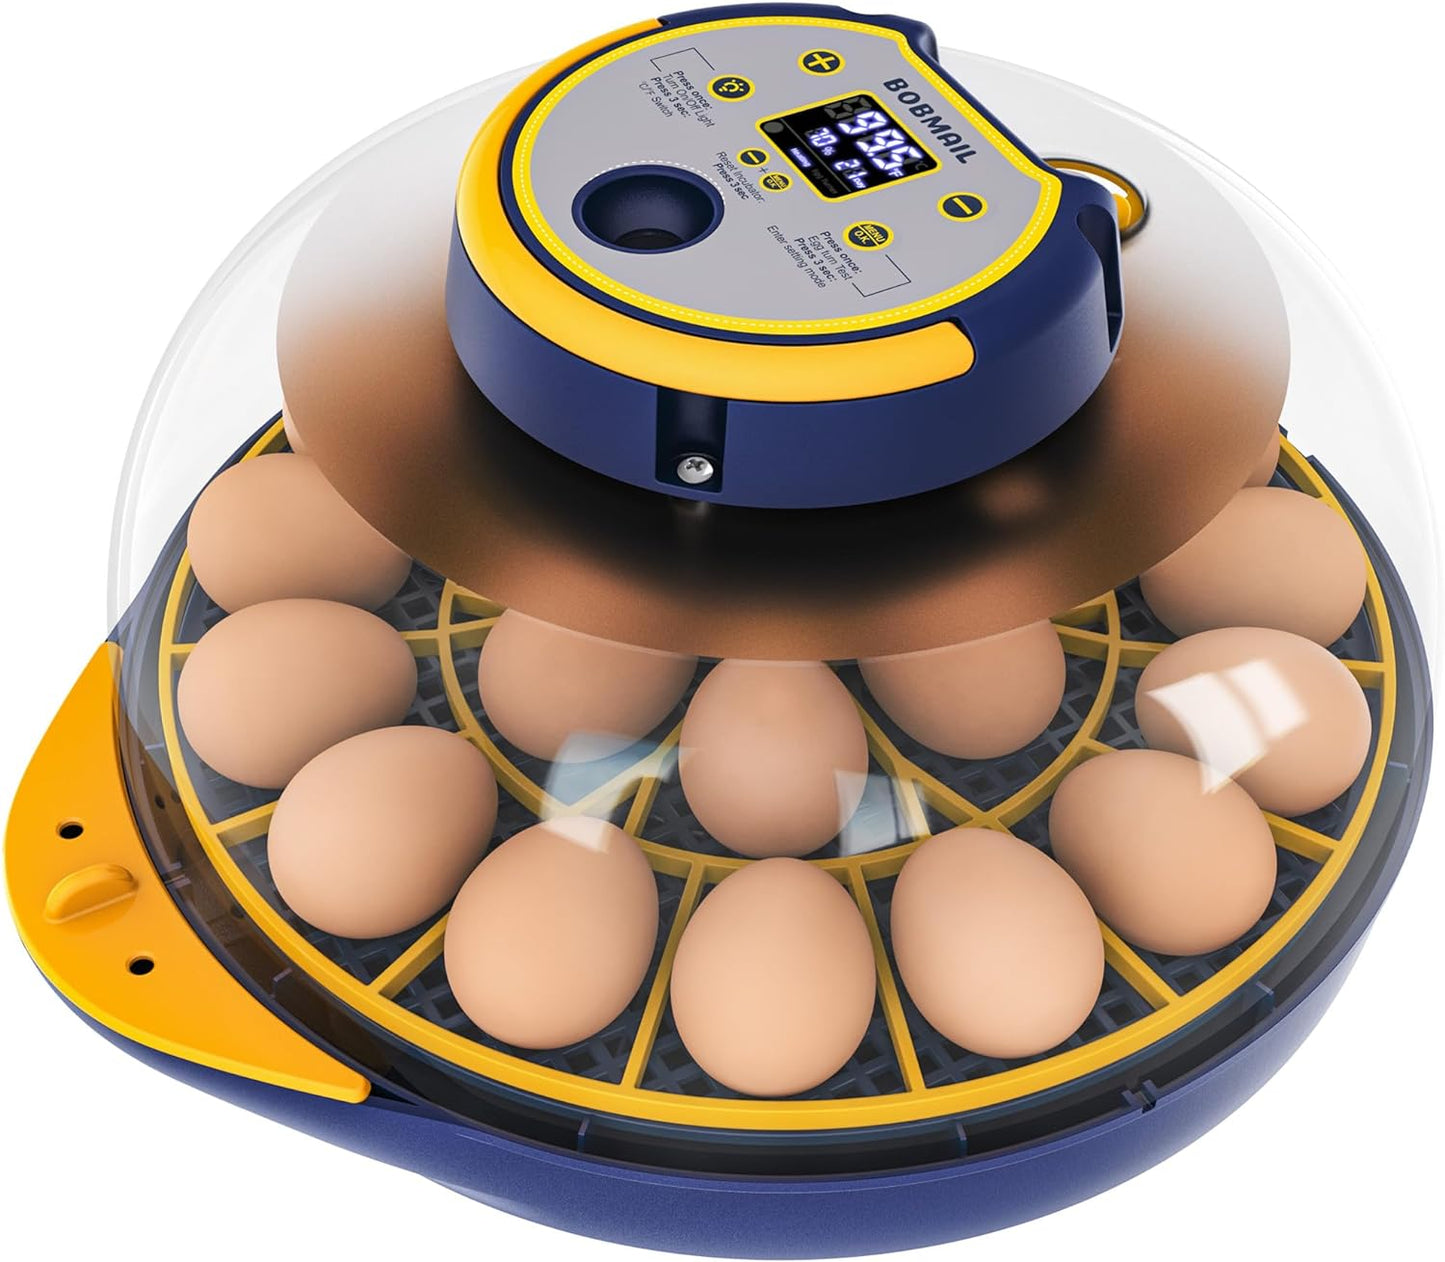 Egg Incubator for Hatching Chickens, Incubator with Automatic Egg Turning and Humidity Control, Hold 21 Chicken Eggs